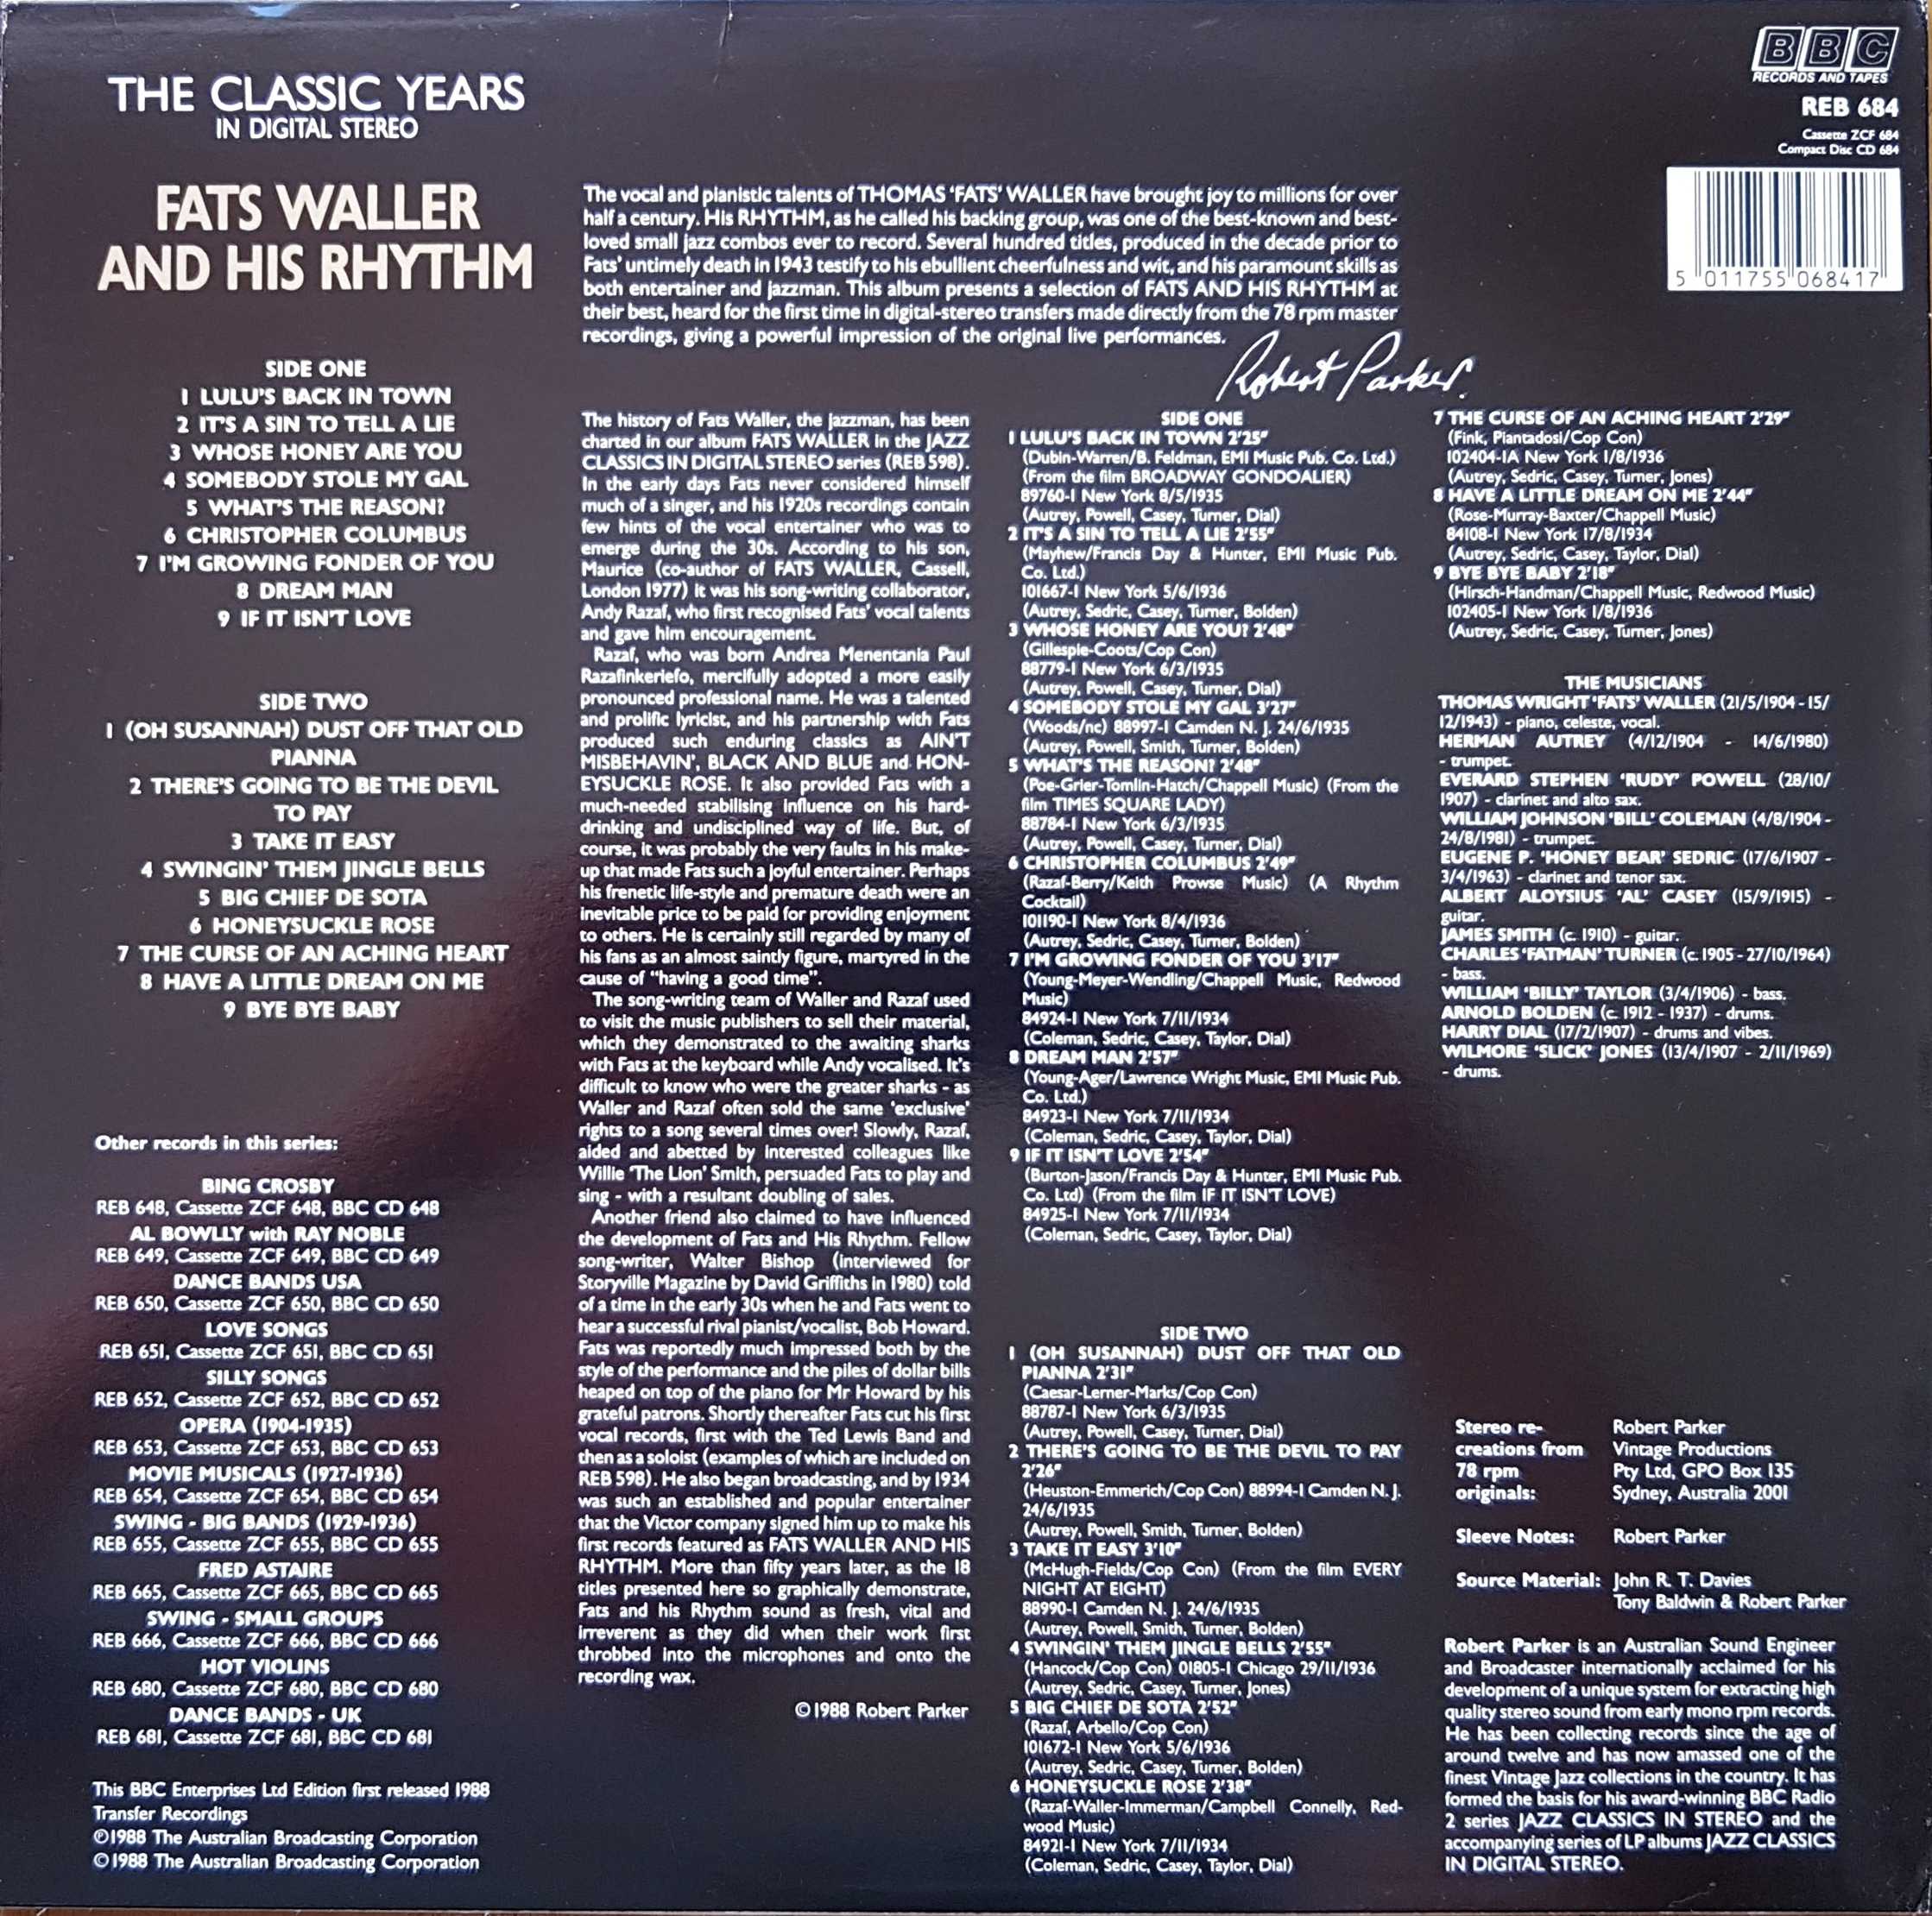 Back cover of REB 684